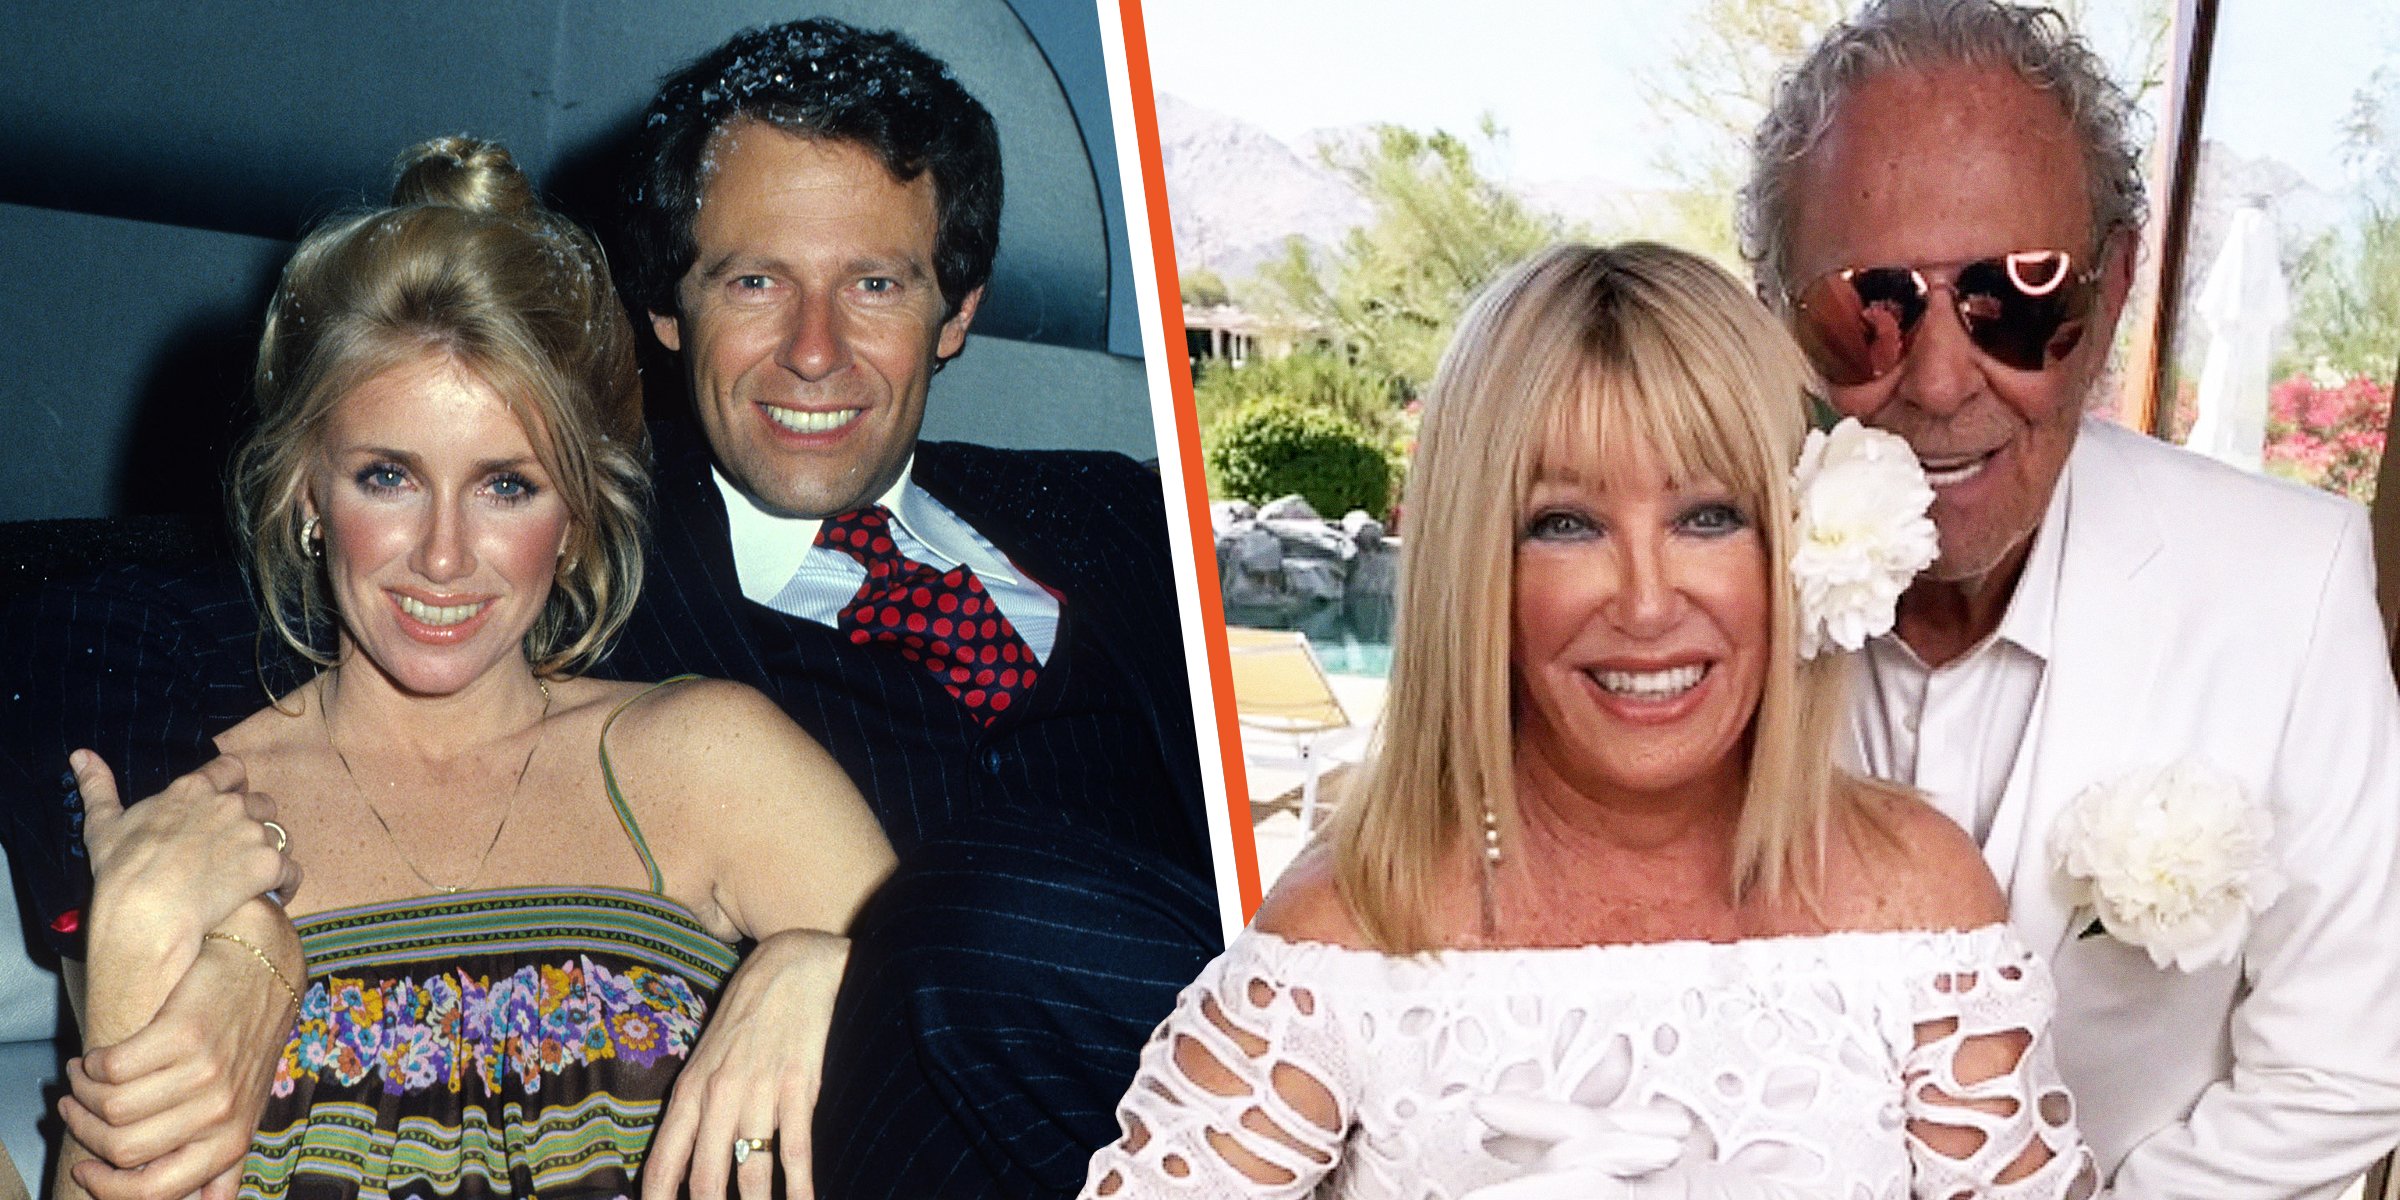 Suzanne Somers and Alan Hamel | Suzanne Somers and Alan Hamel | Source: Getty Images | Instagram.com/suzannesomers